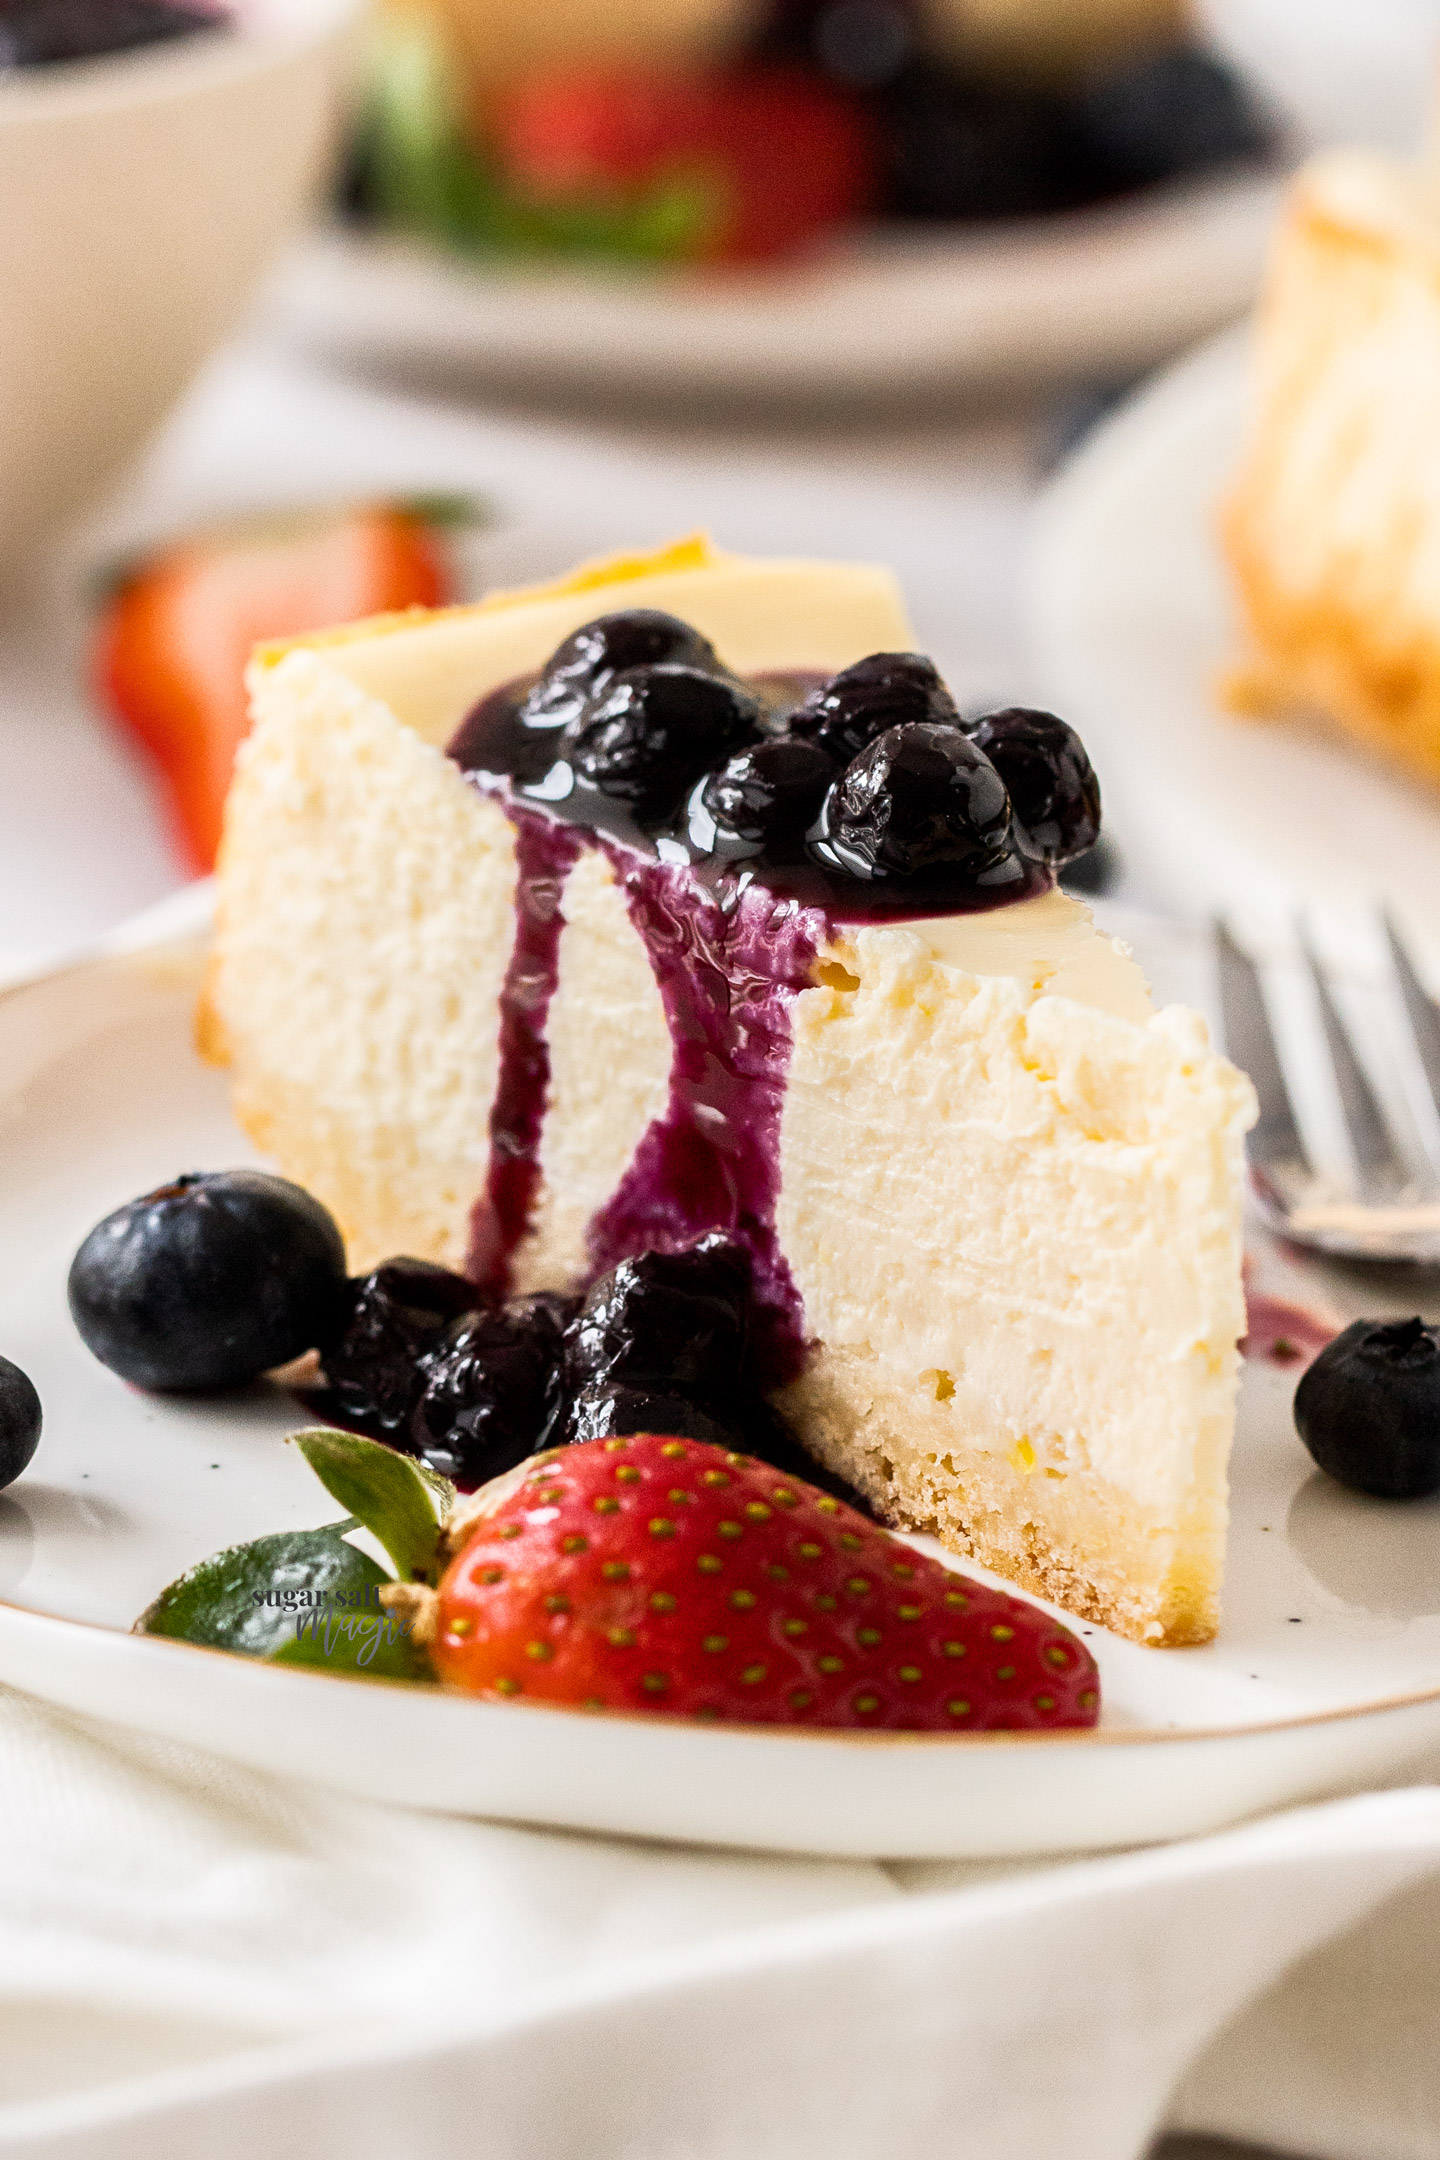 A closeup of a slice of baked cheesecake.